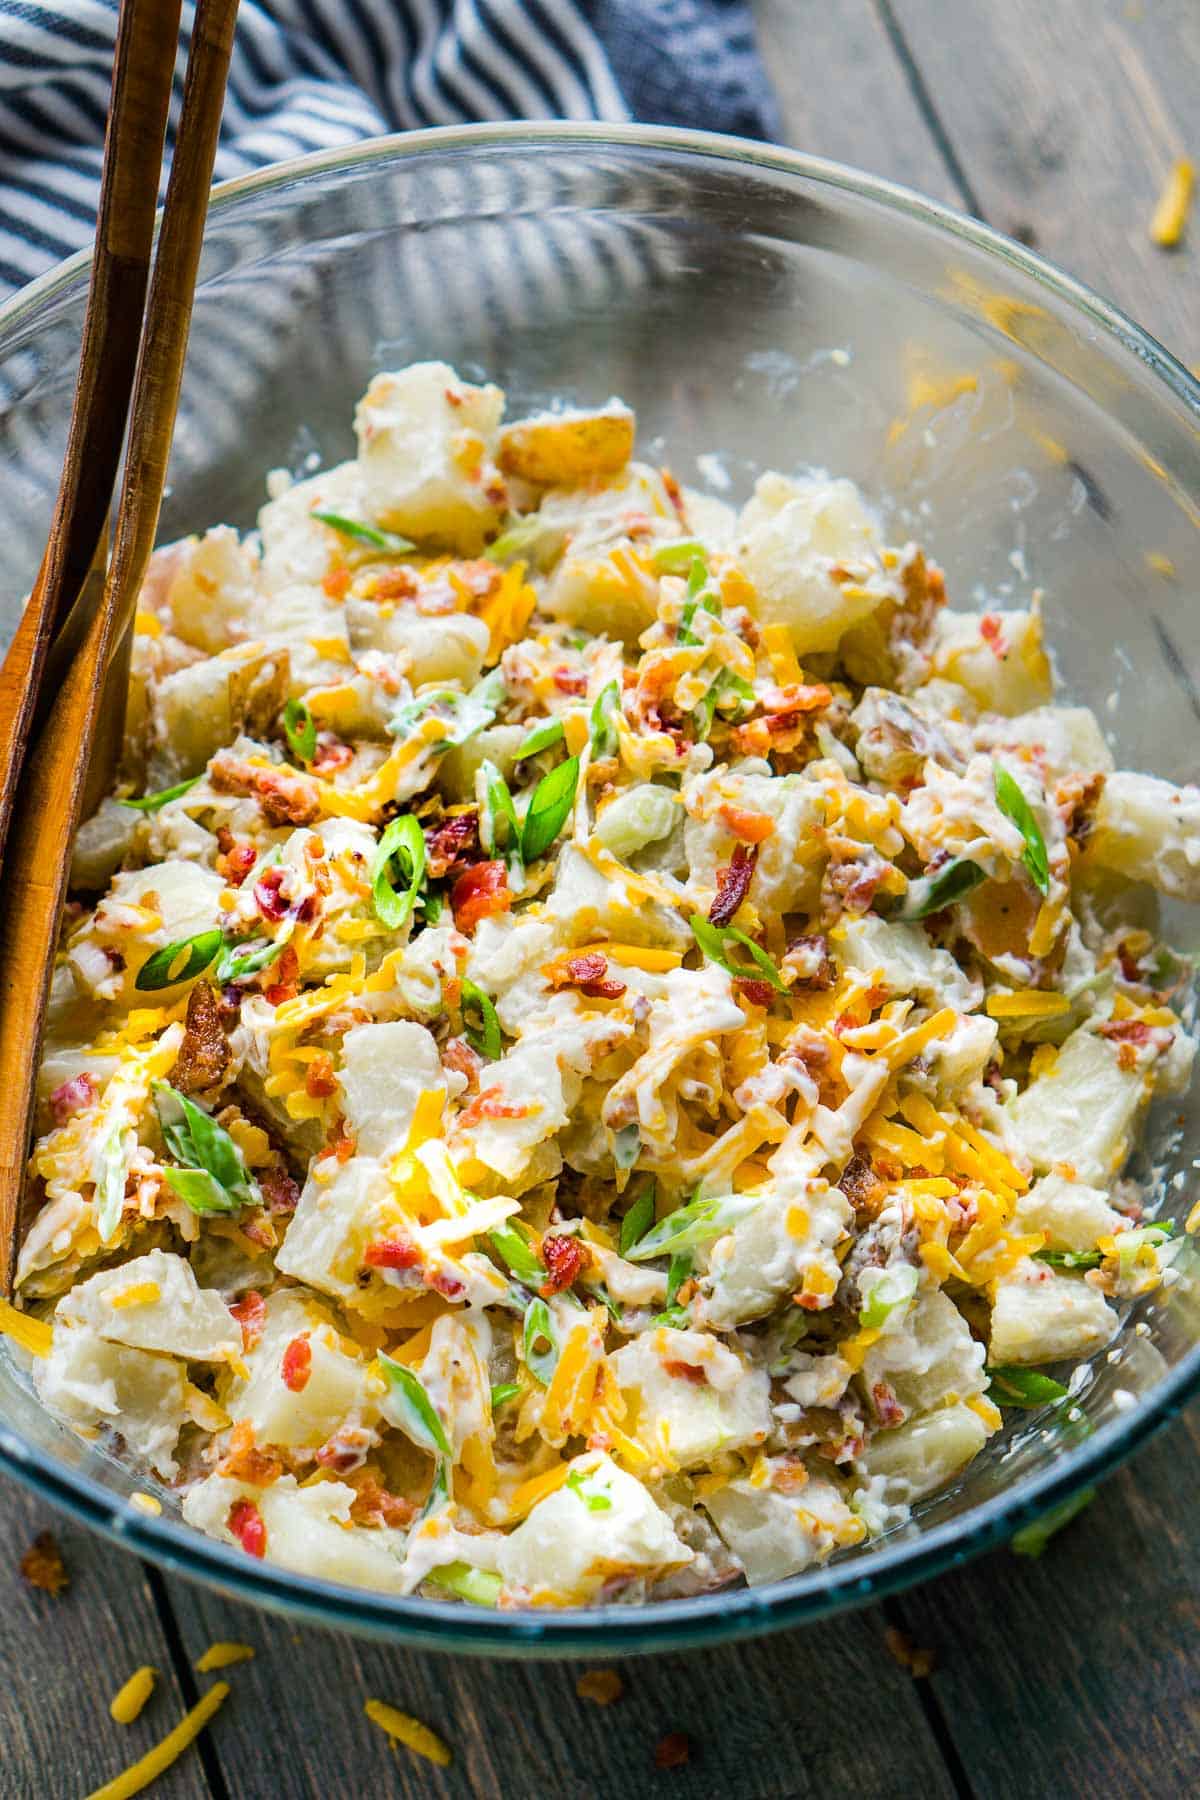 loaded baked potato salad in glass serving bowls with serving utensils